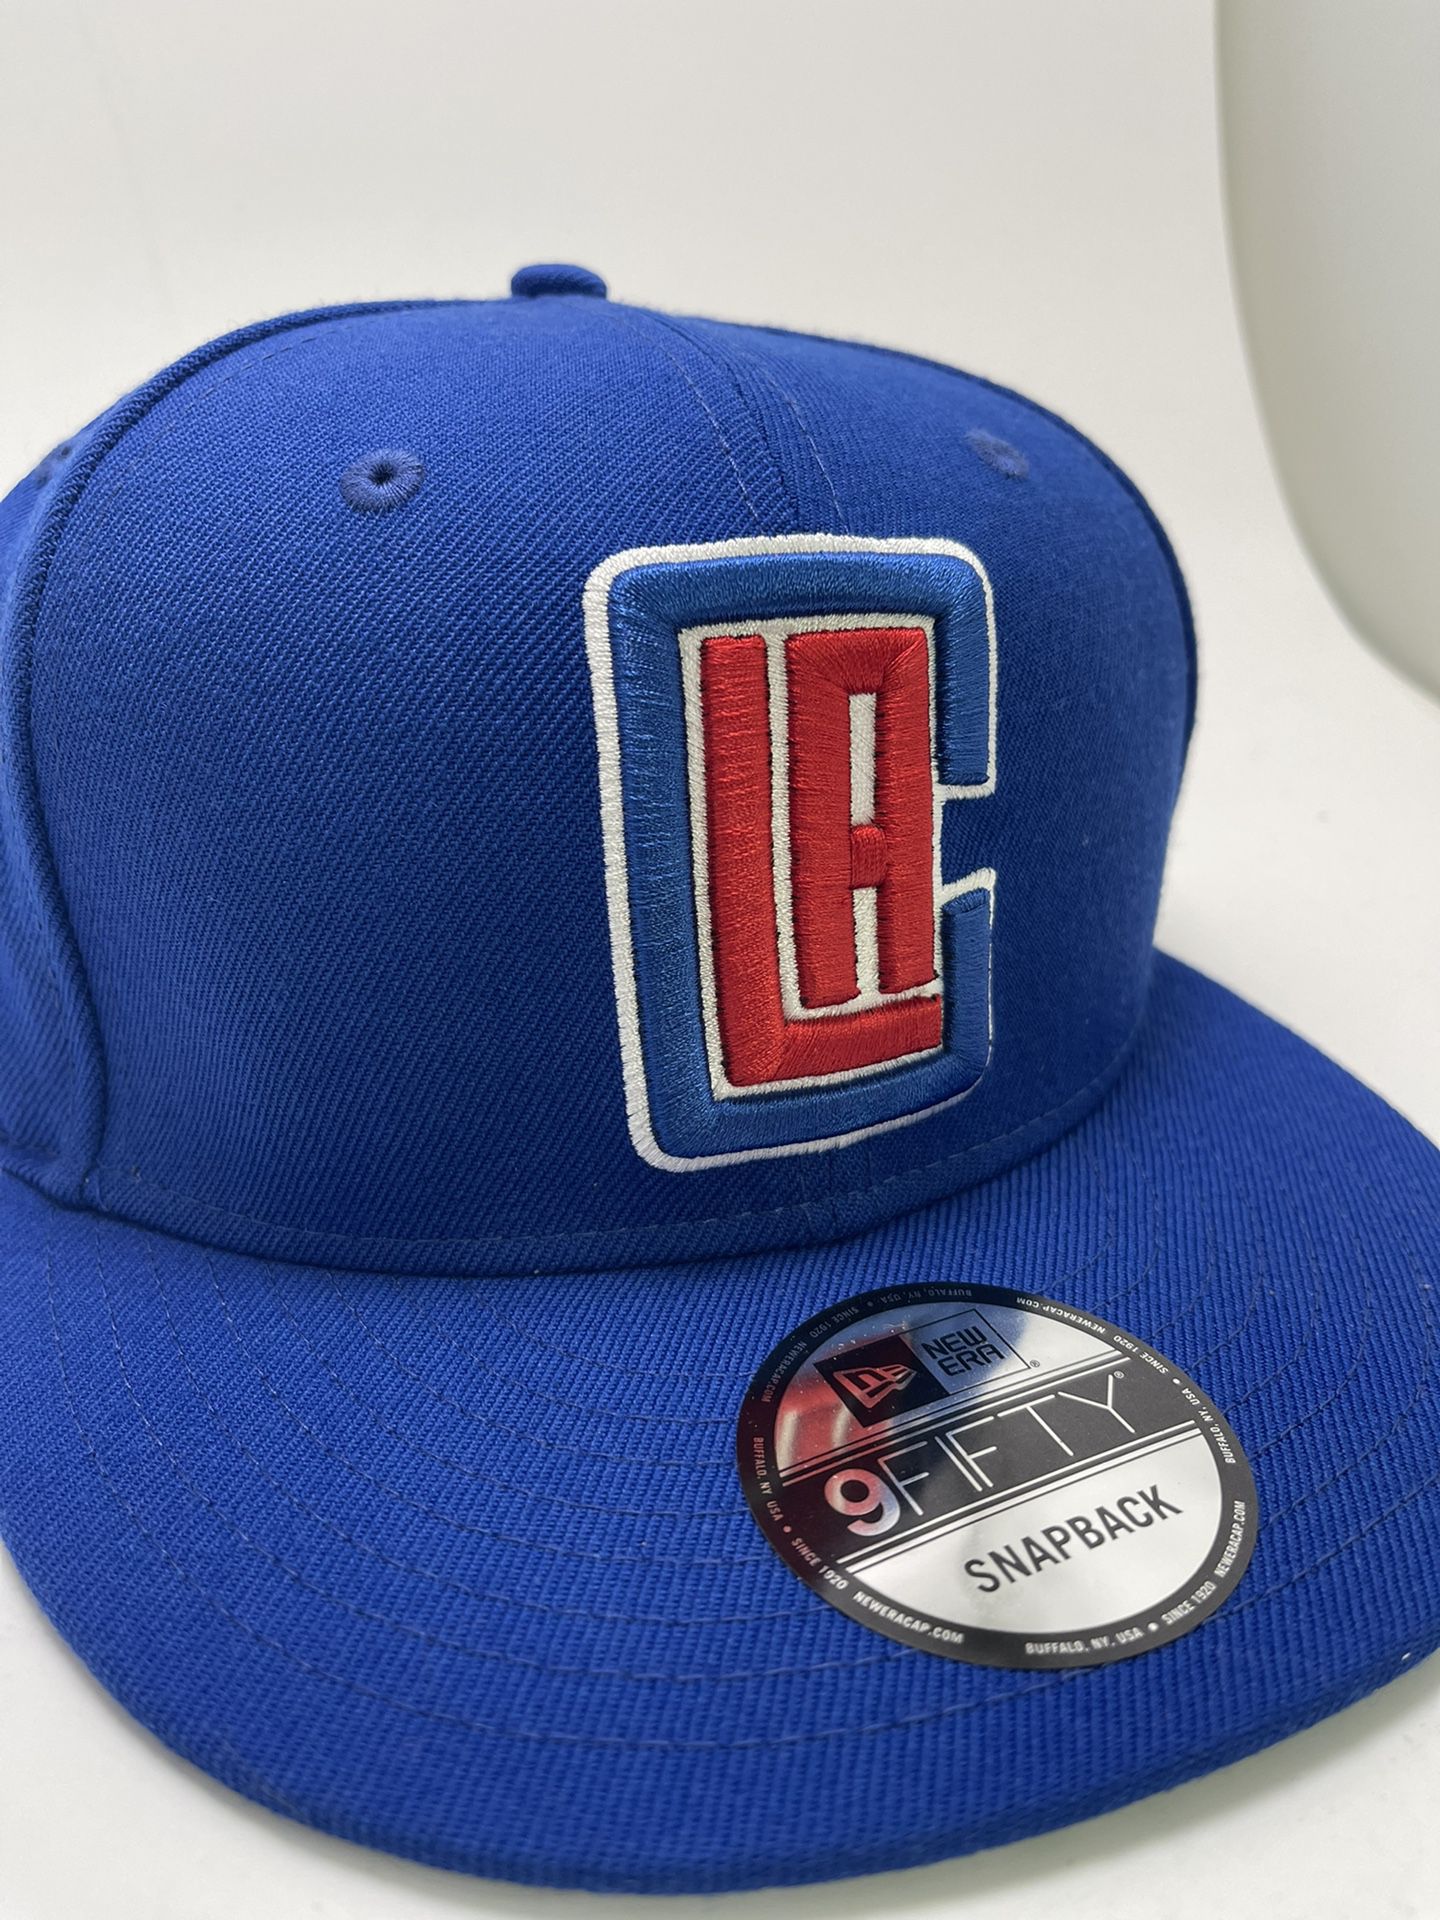 Los Angeles clippers Snapback Brand new